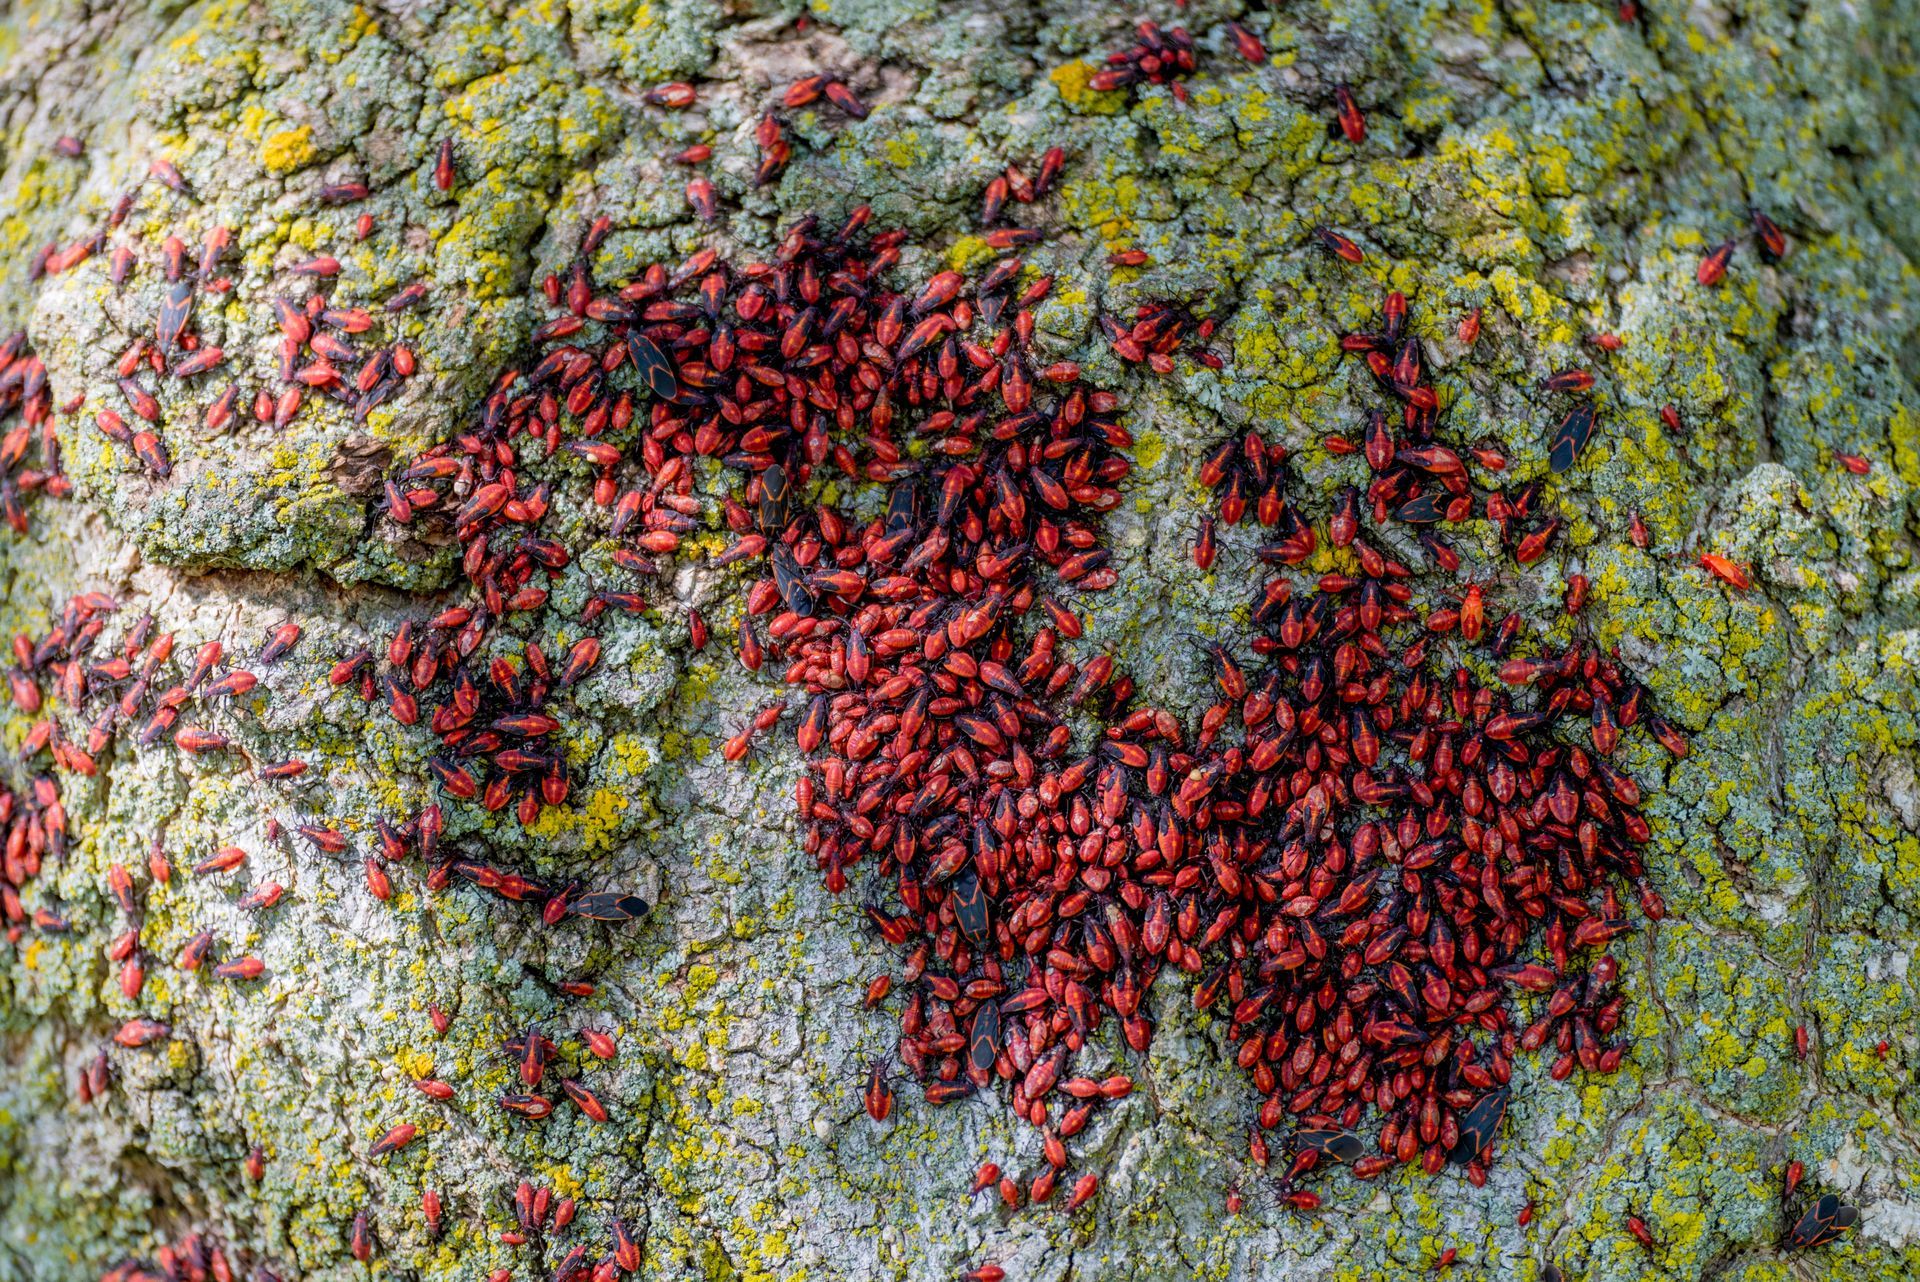 image of boxelder bugs on a tree